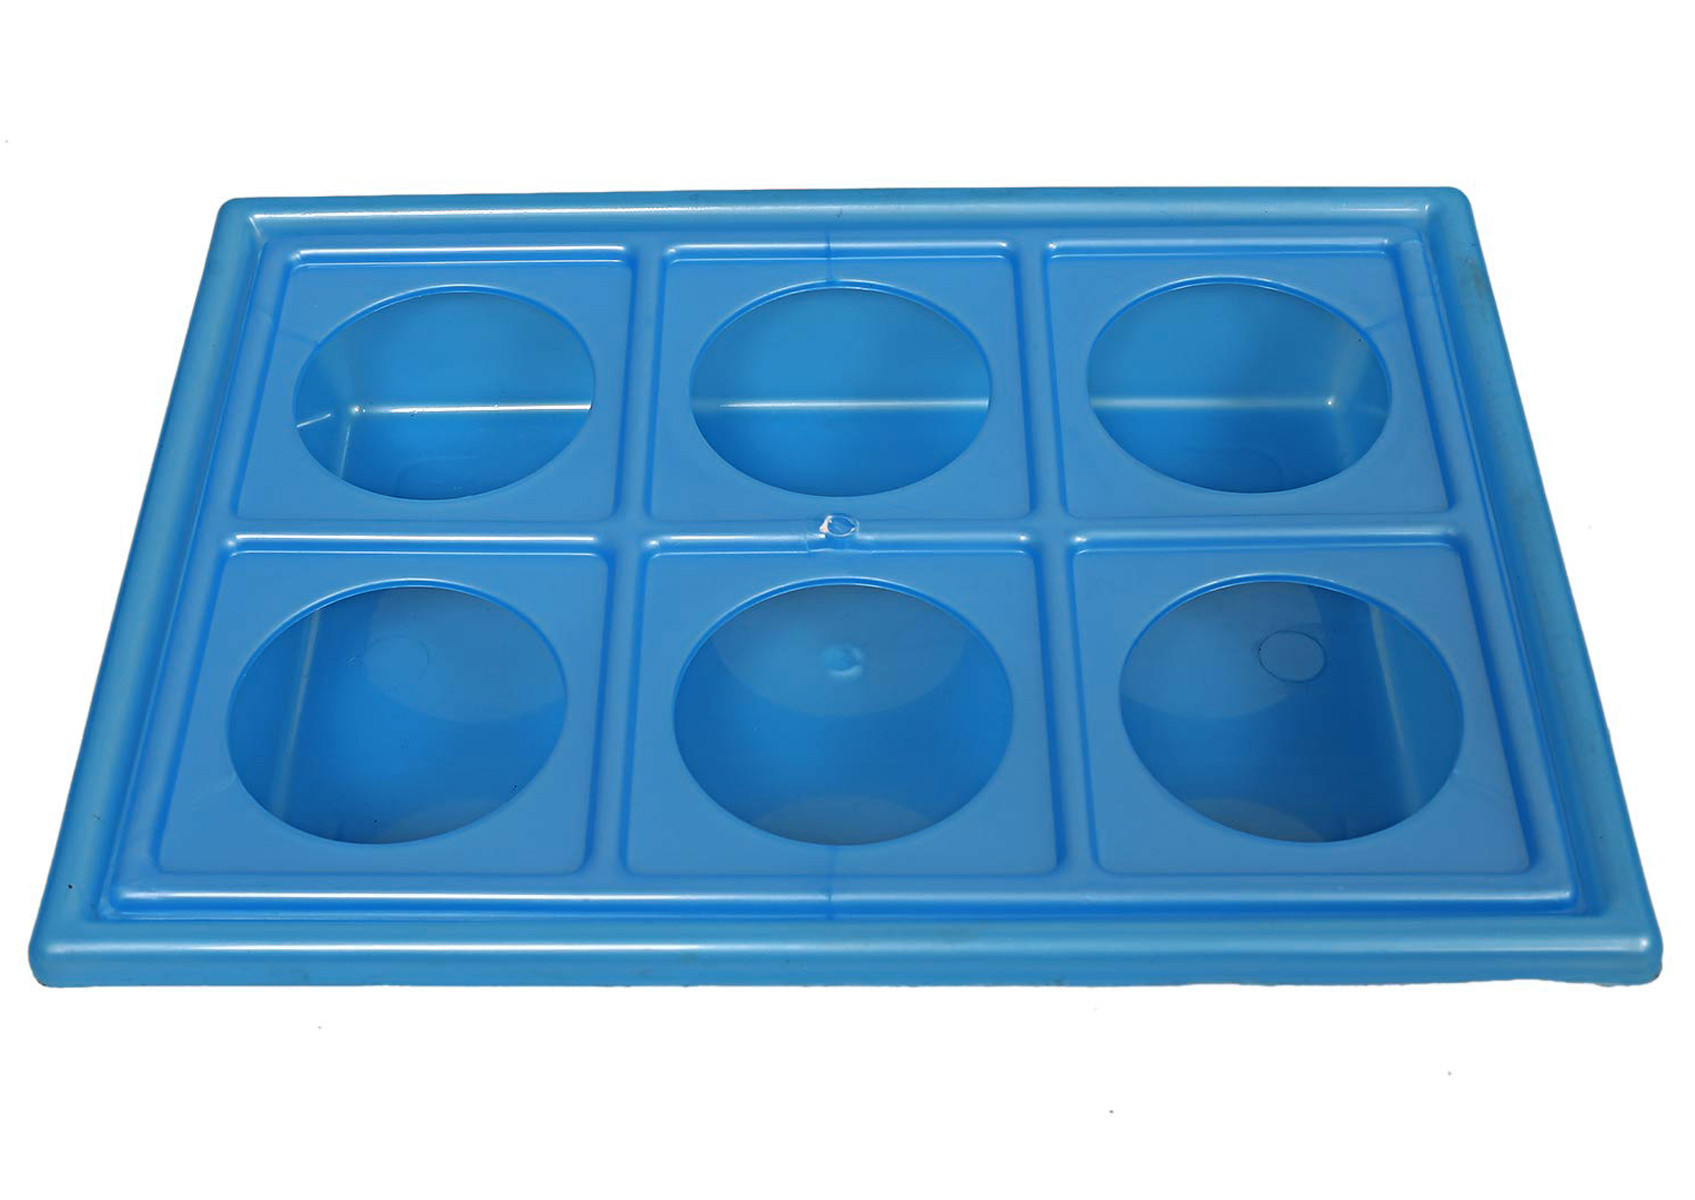 Kuber Industries Tray with Cutout Handles, Cup Display for Kitchenware, Plastic Glass Holder, One Size, 6 Slots-Pack of 2 (Blue & Pink)